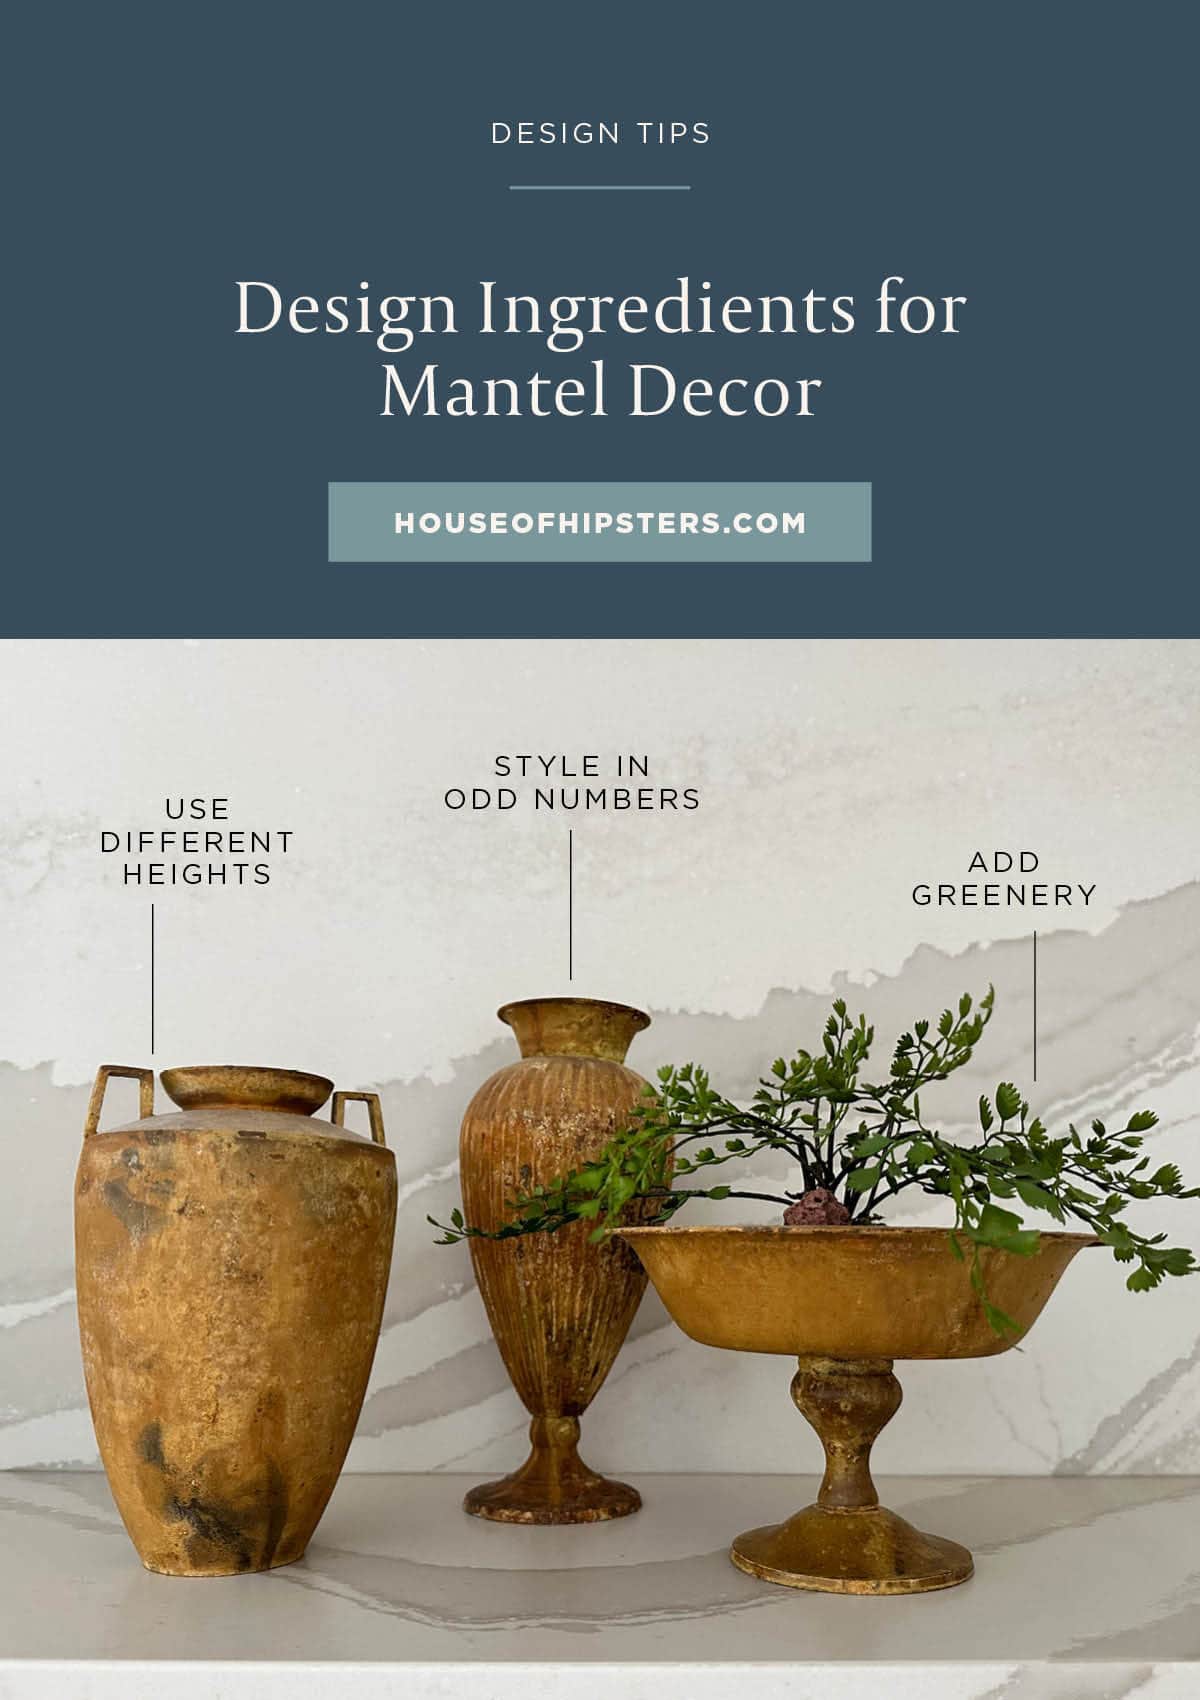 Design Elements for Styling Mantel Decor - Style your mantel decor like a pro with these 5 simple design rules.